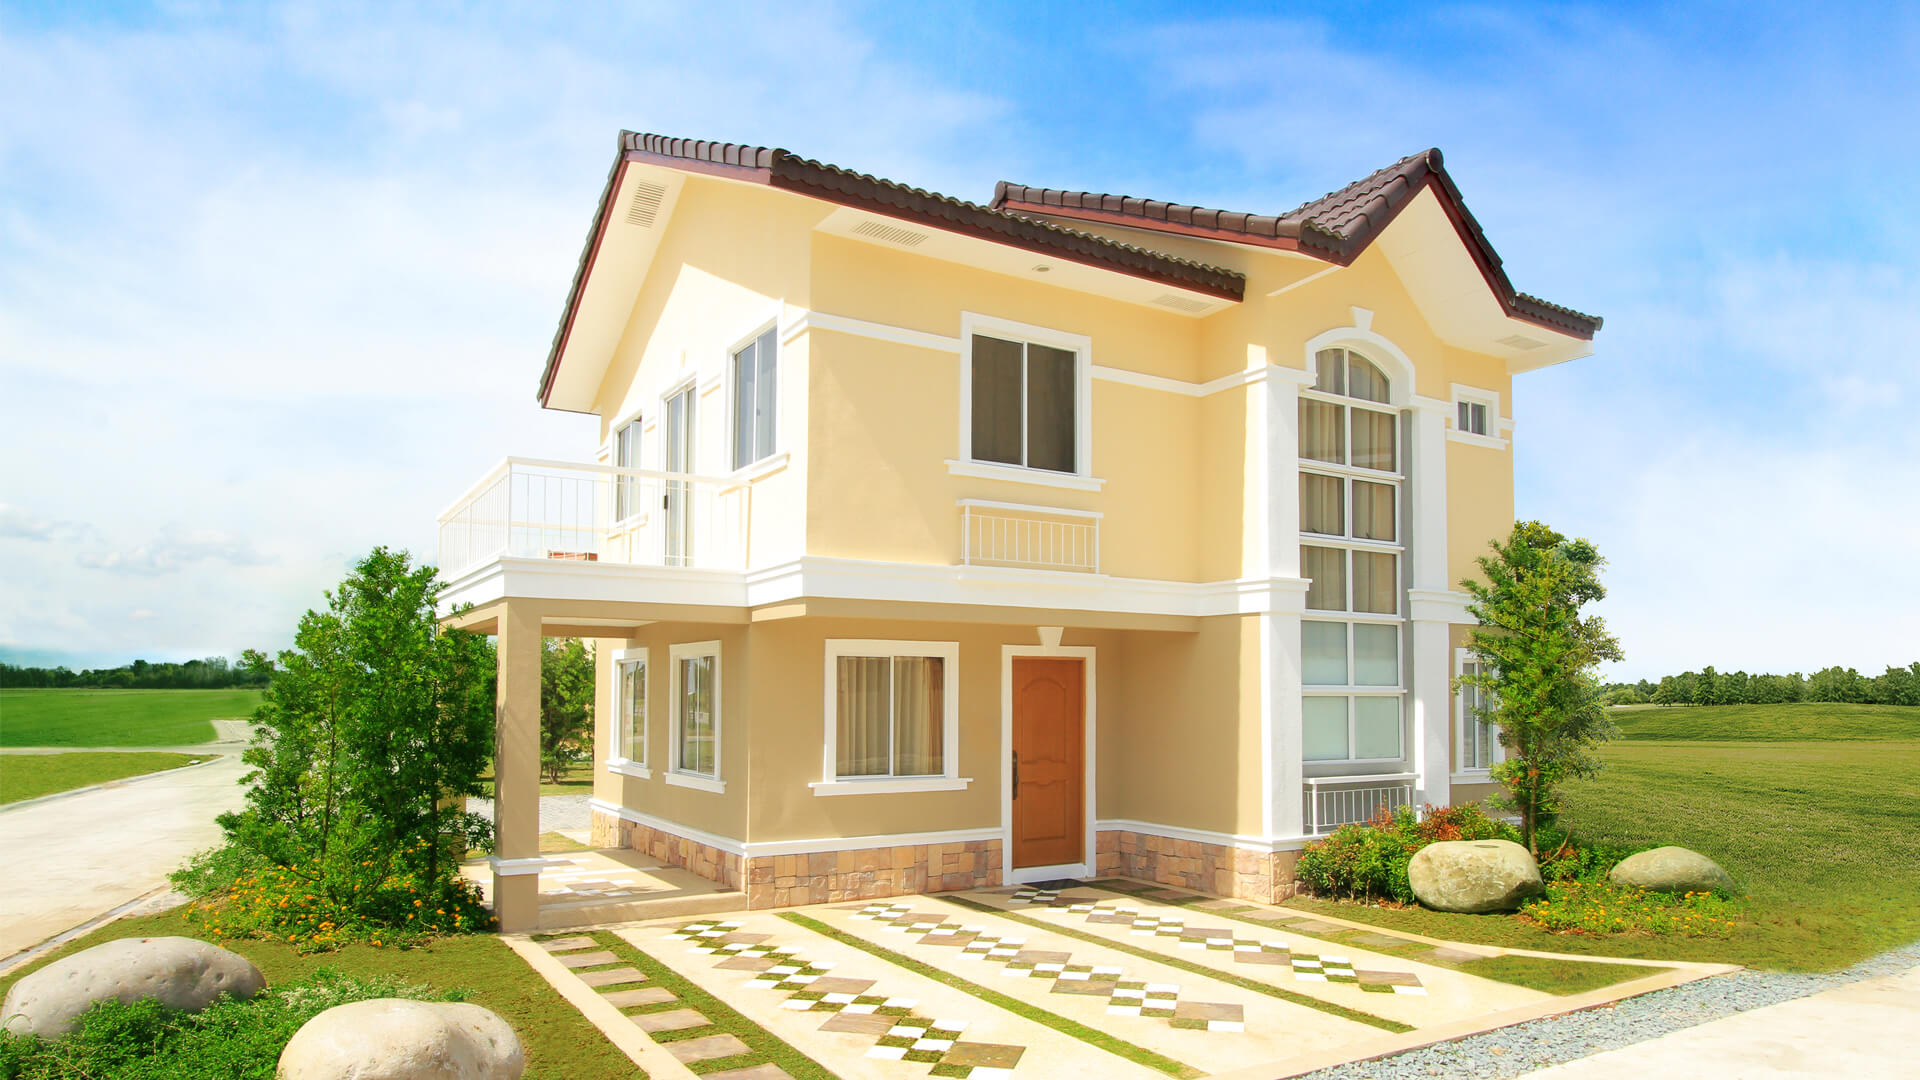 Cavite House and Lot? This Community Has It All